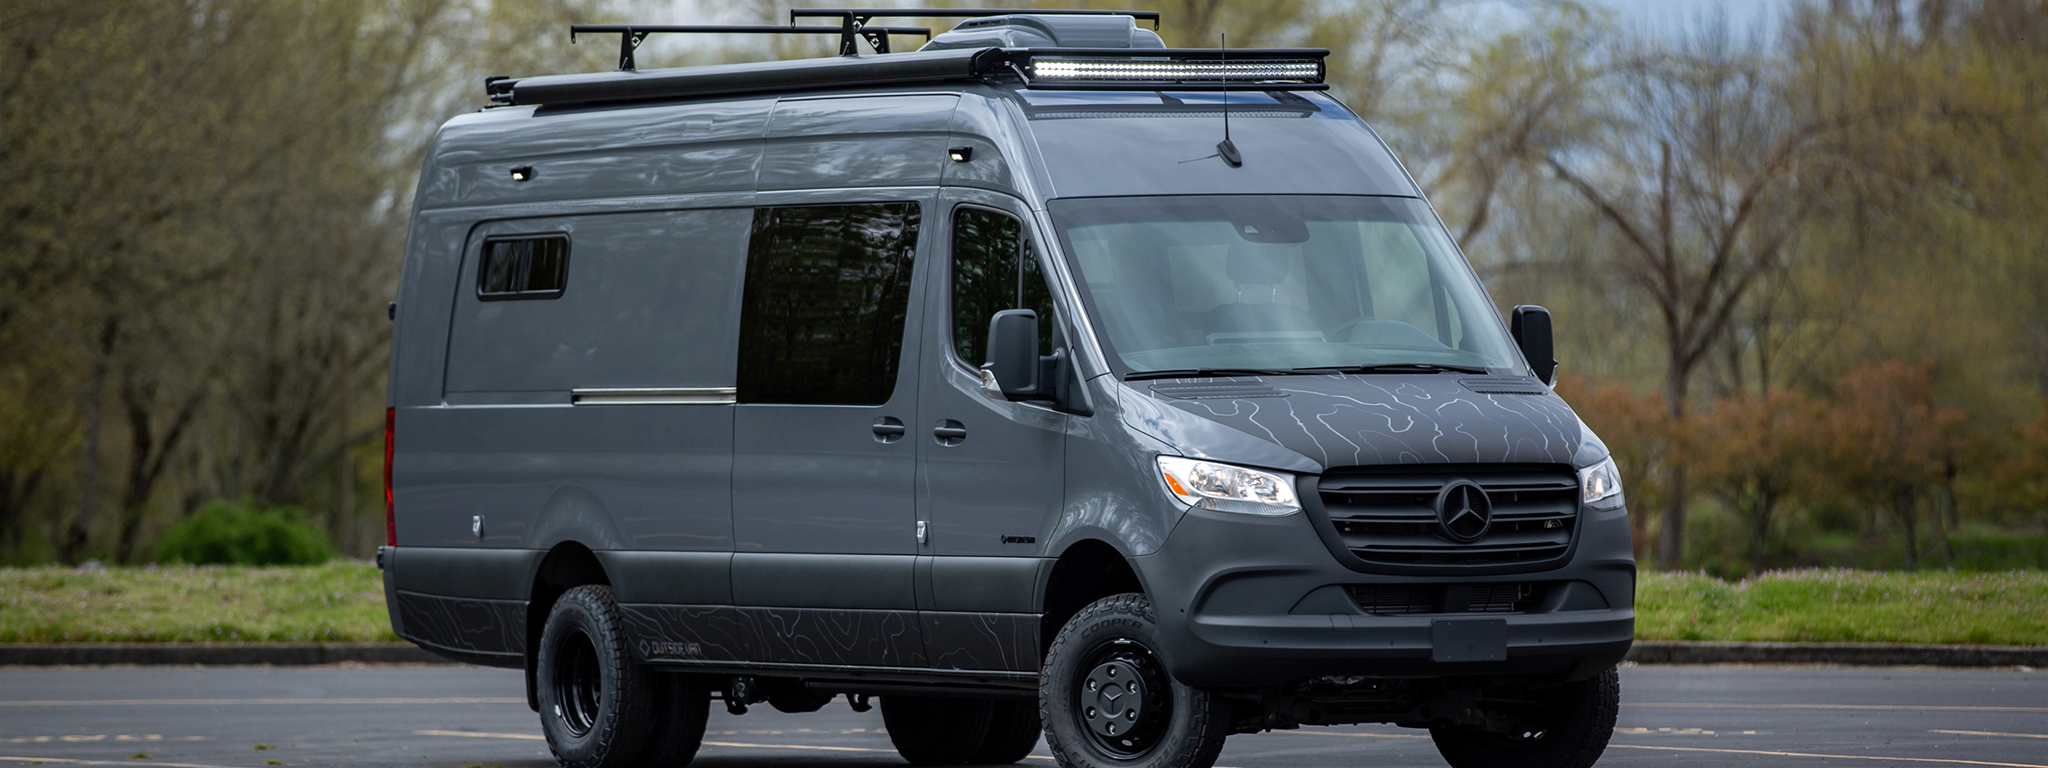 An extended van that has the ability to take extended trips with the whole family